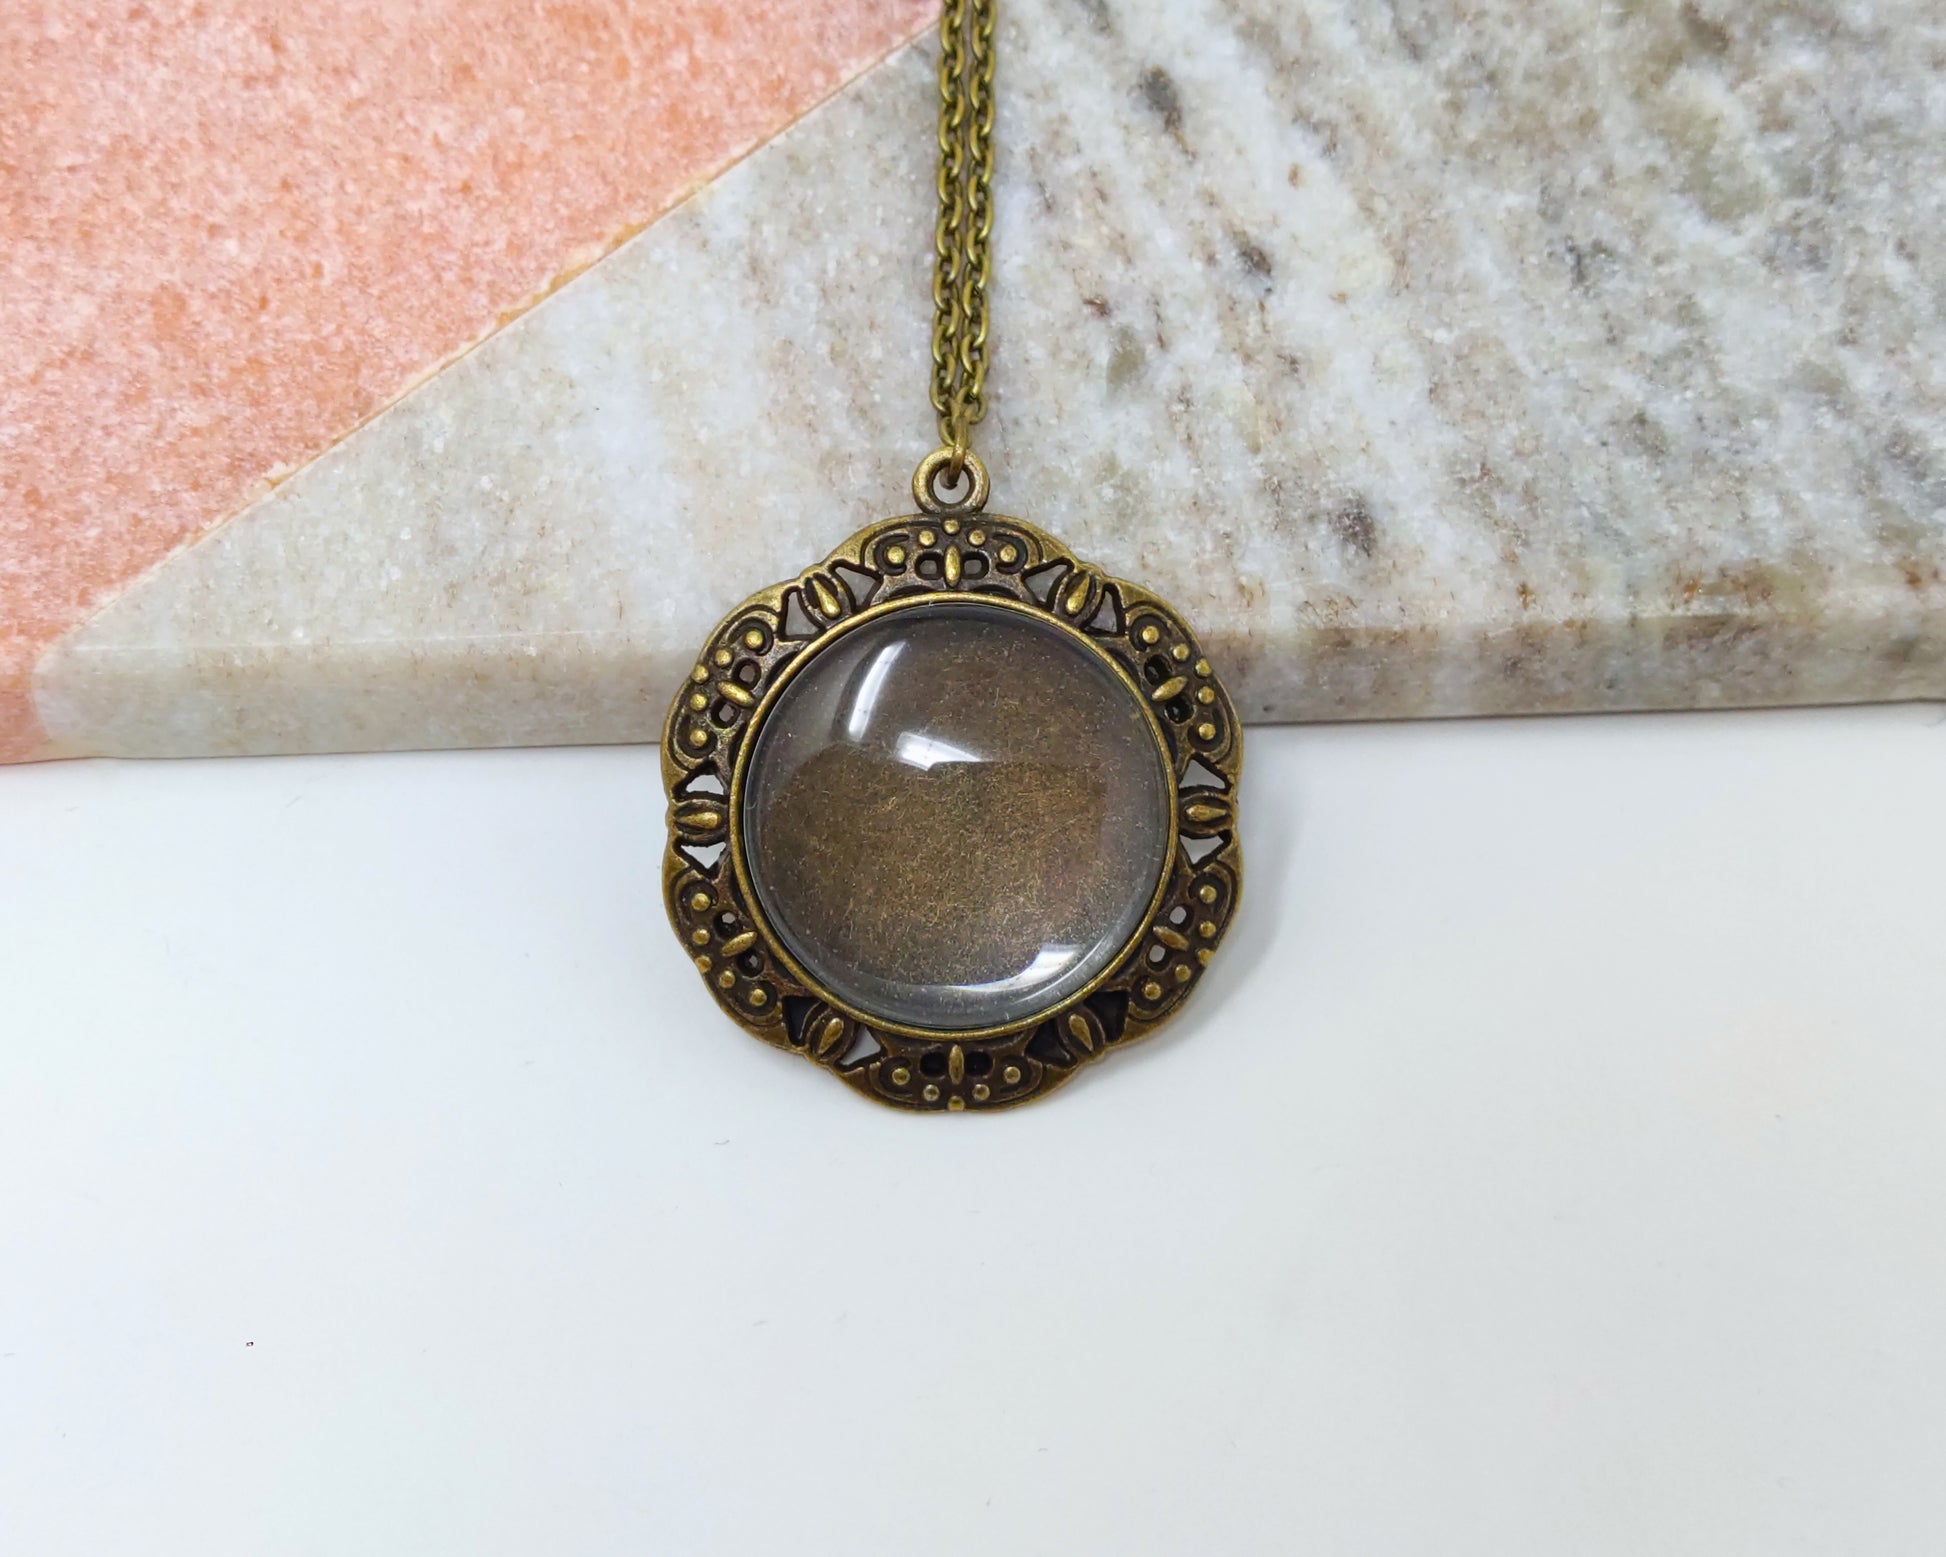 Use our DIY jewelry making supplies and create Handmade Cabochon Jewelry or gift for her with our Antique Bronze Color 25mm cabochon pendant Setting. Put your favorite photos, cabochons, gemstone cabochons, resin, image cabochons in to bezel pendant.